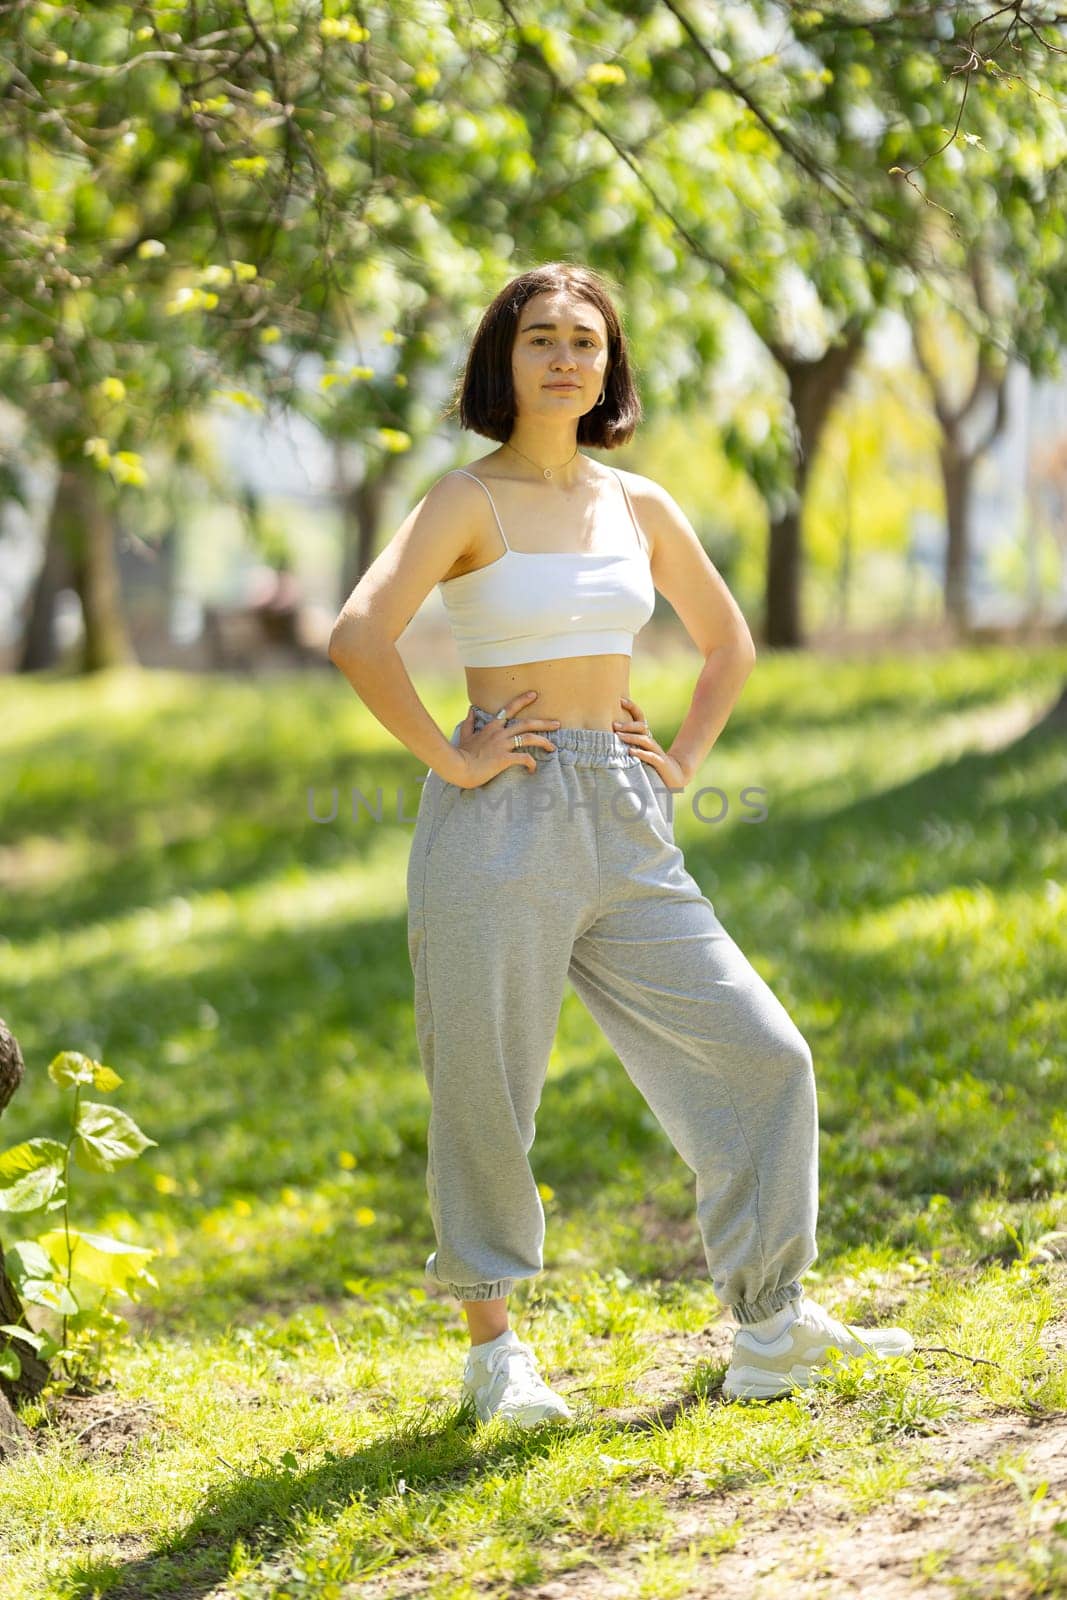 A woman is standing in a park wearing a white tank top and grey sweatpants. She is posing for a picture and she is confident and relaxed